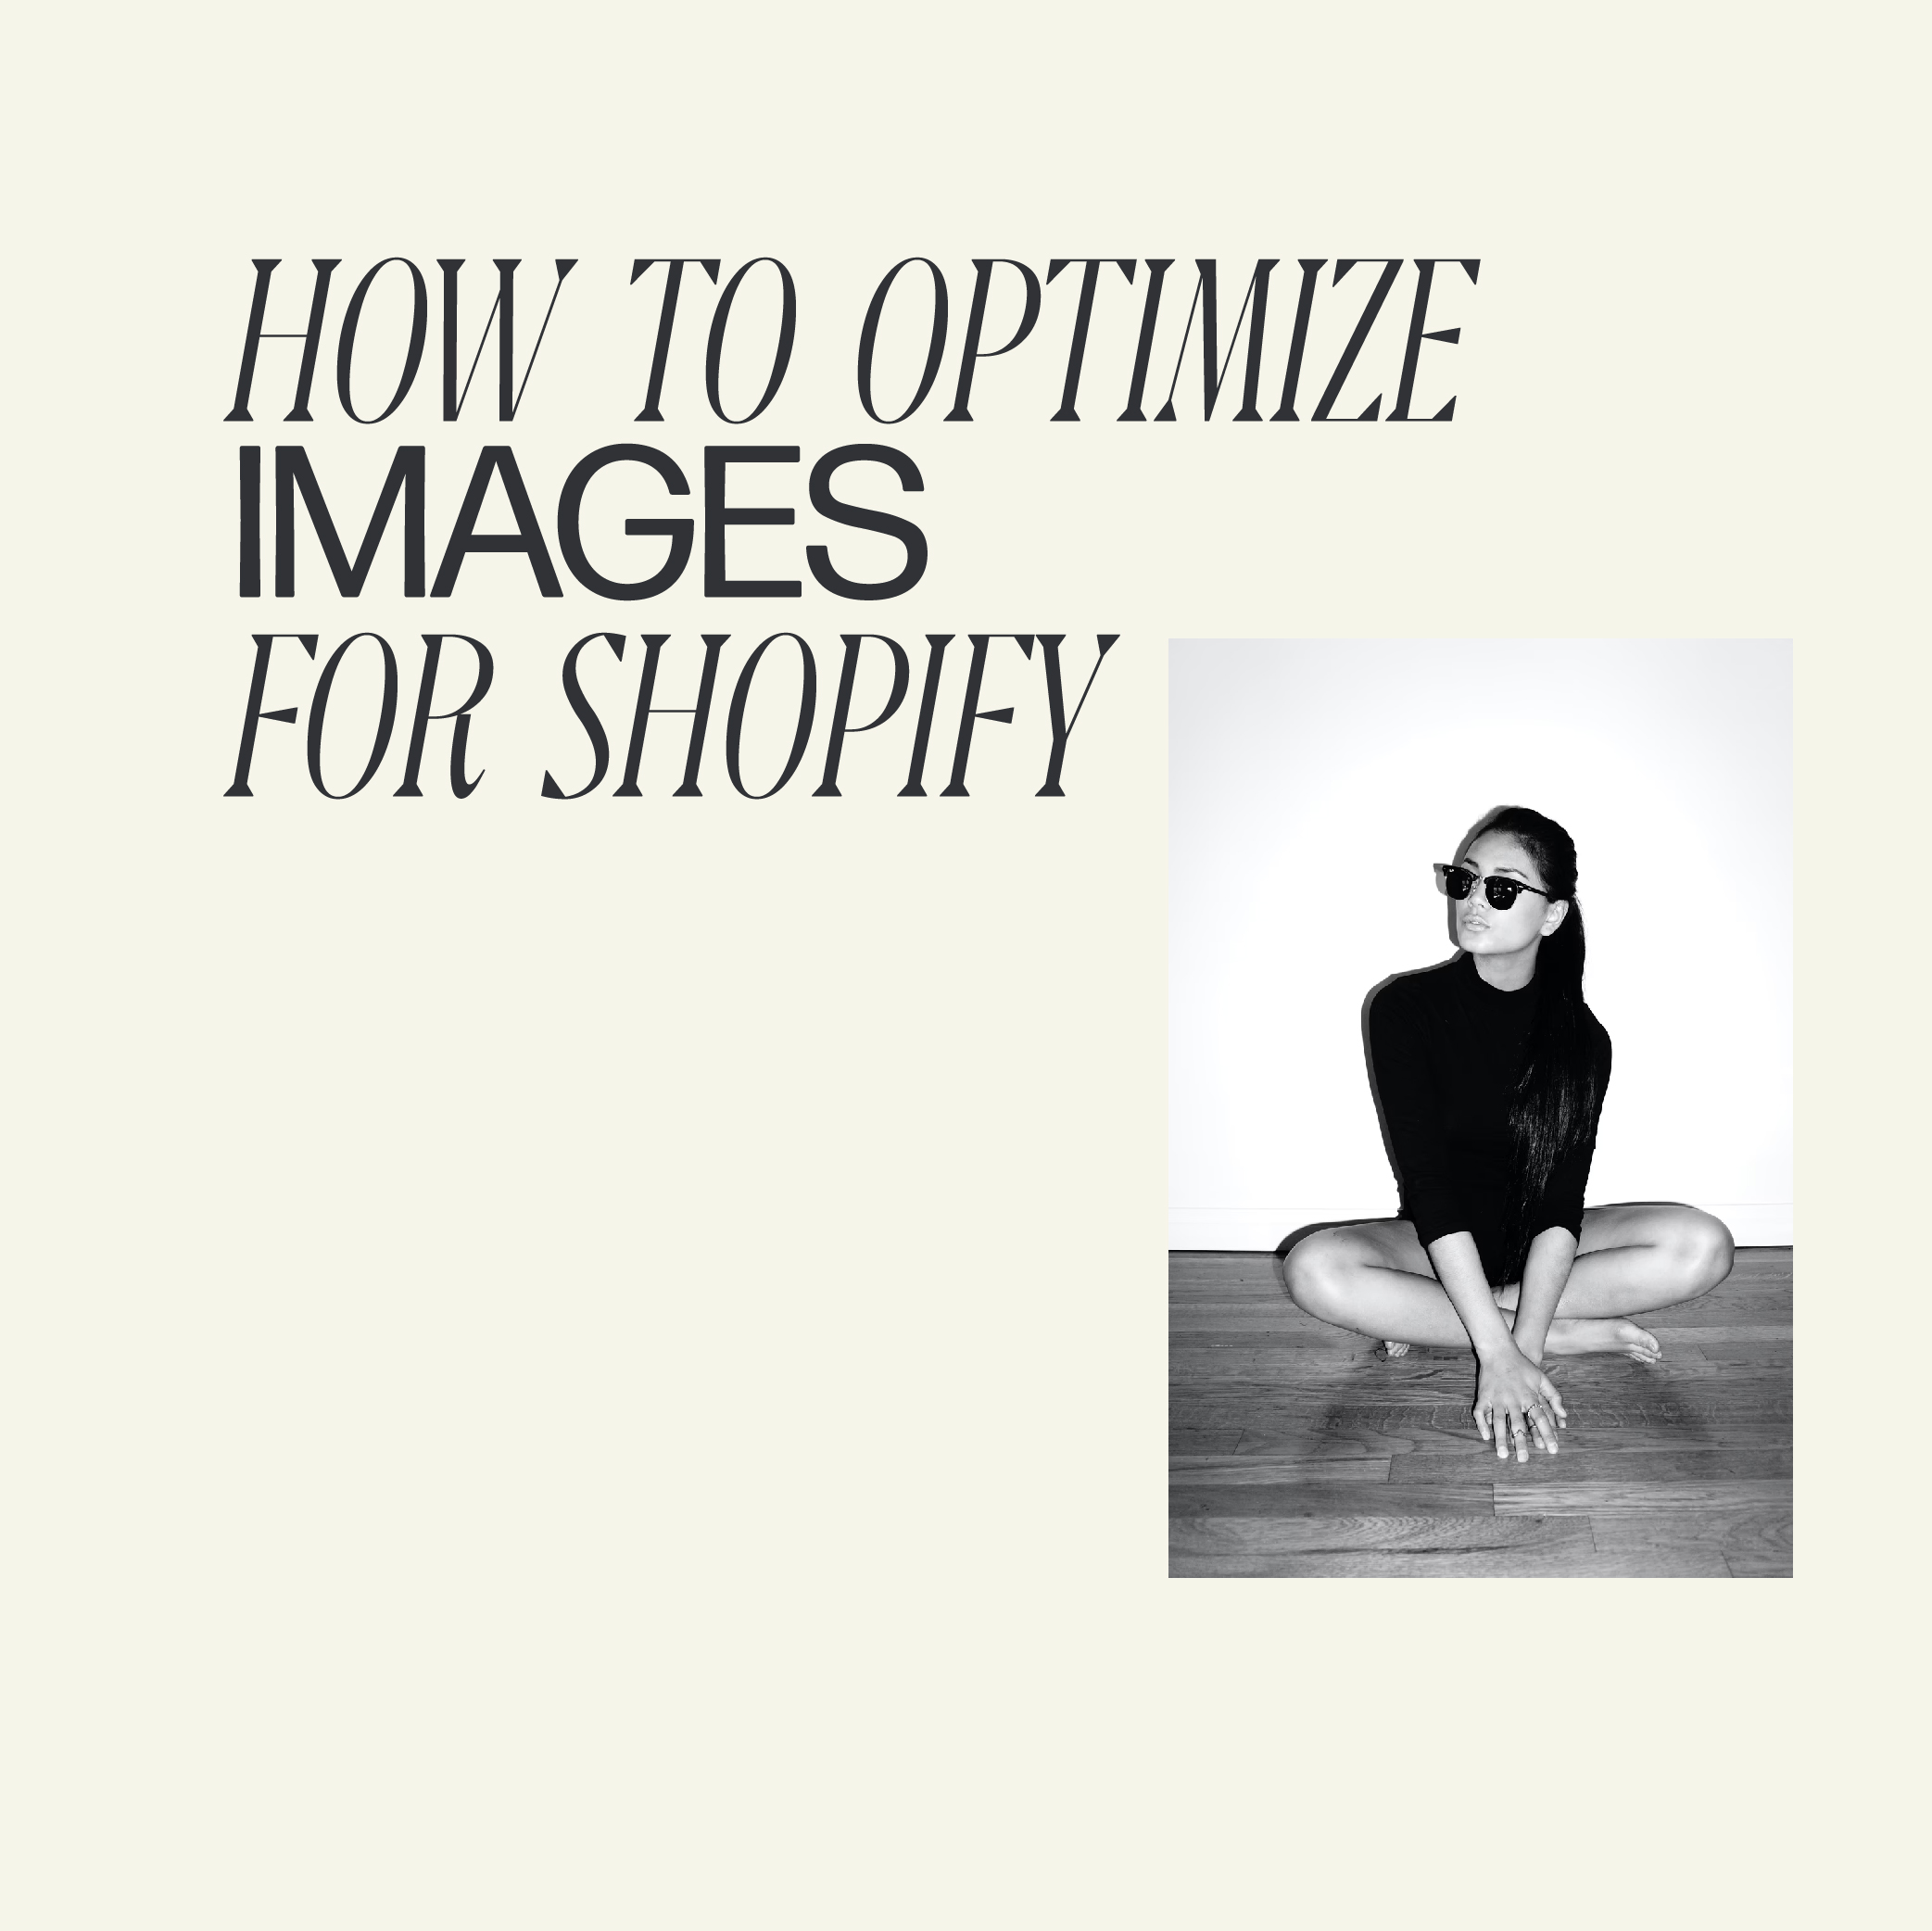 How to Optimize Images for Shopify